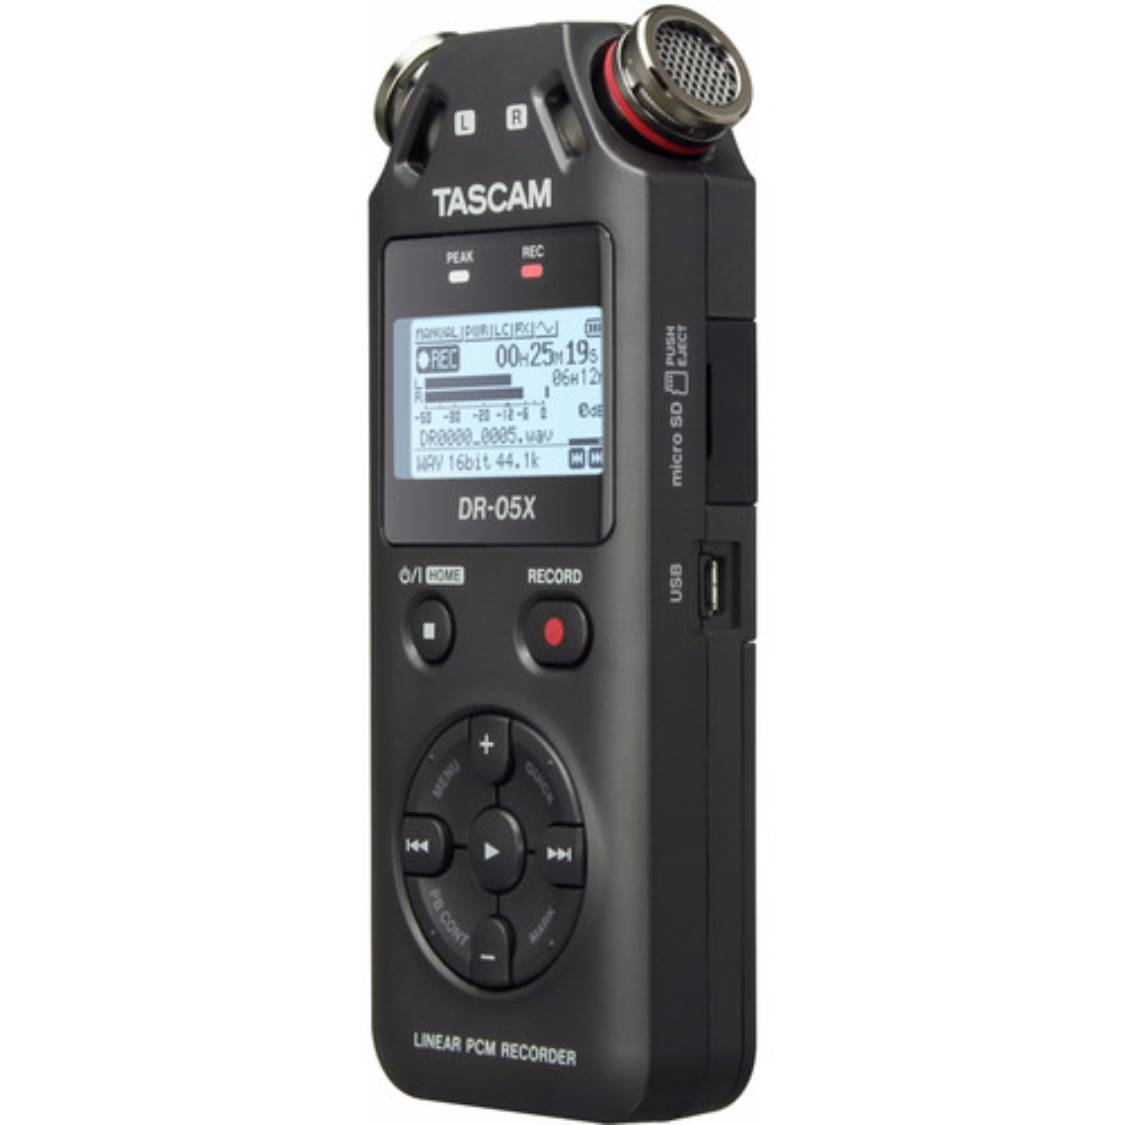 Tascam DR-05X 2-Input / 2-Track Portable Audio Recorder with